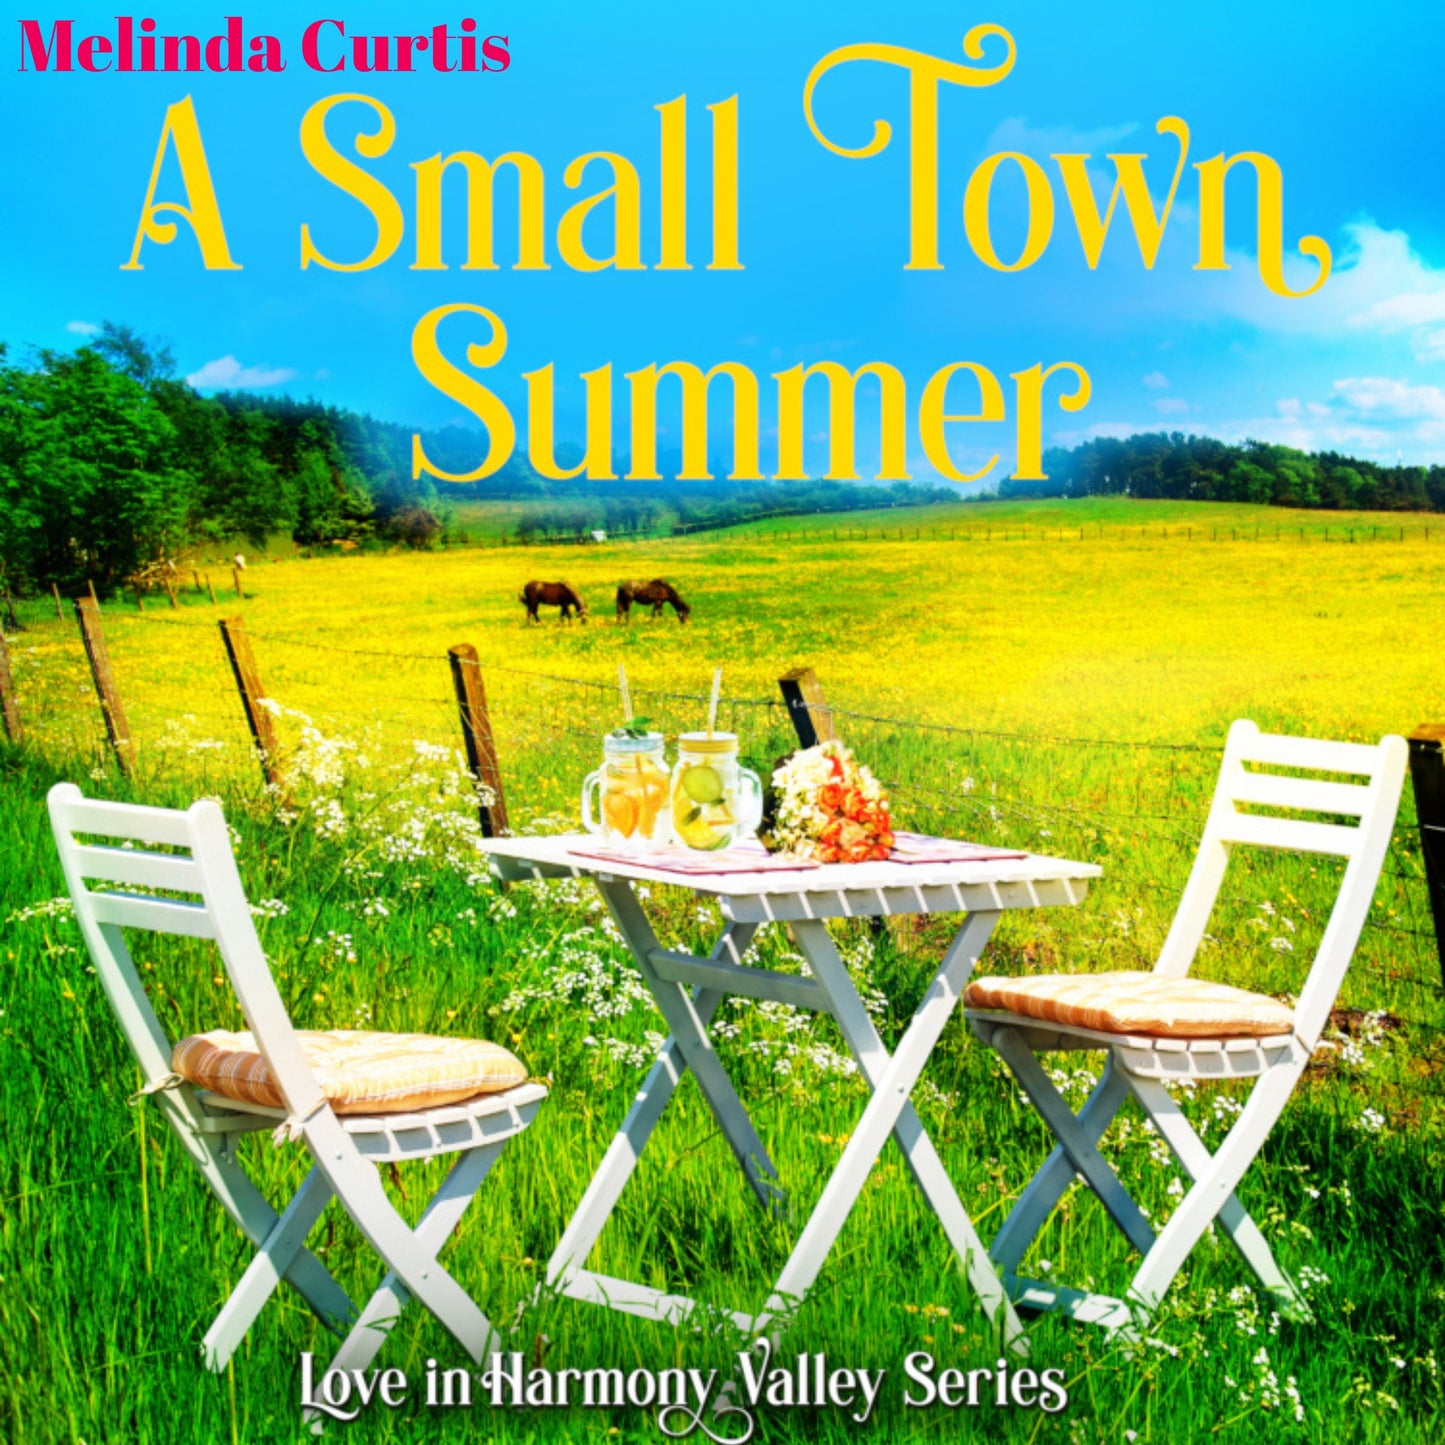 A Small Town Summer AUDIO Book (Love in Harmony Valley Book 4)